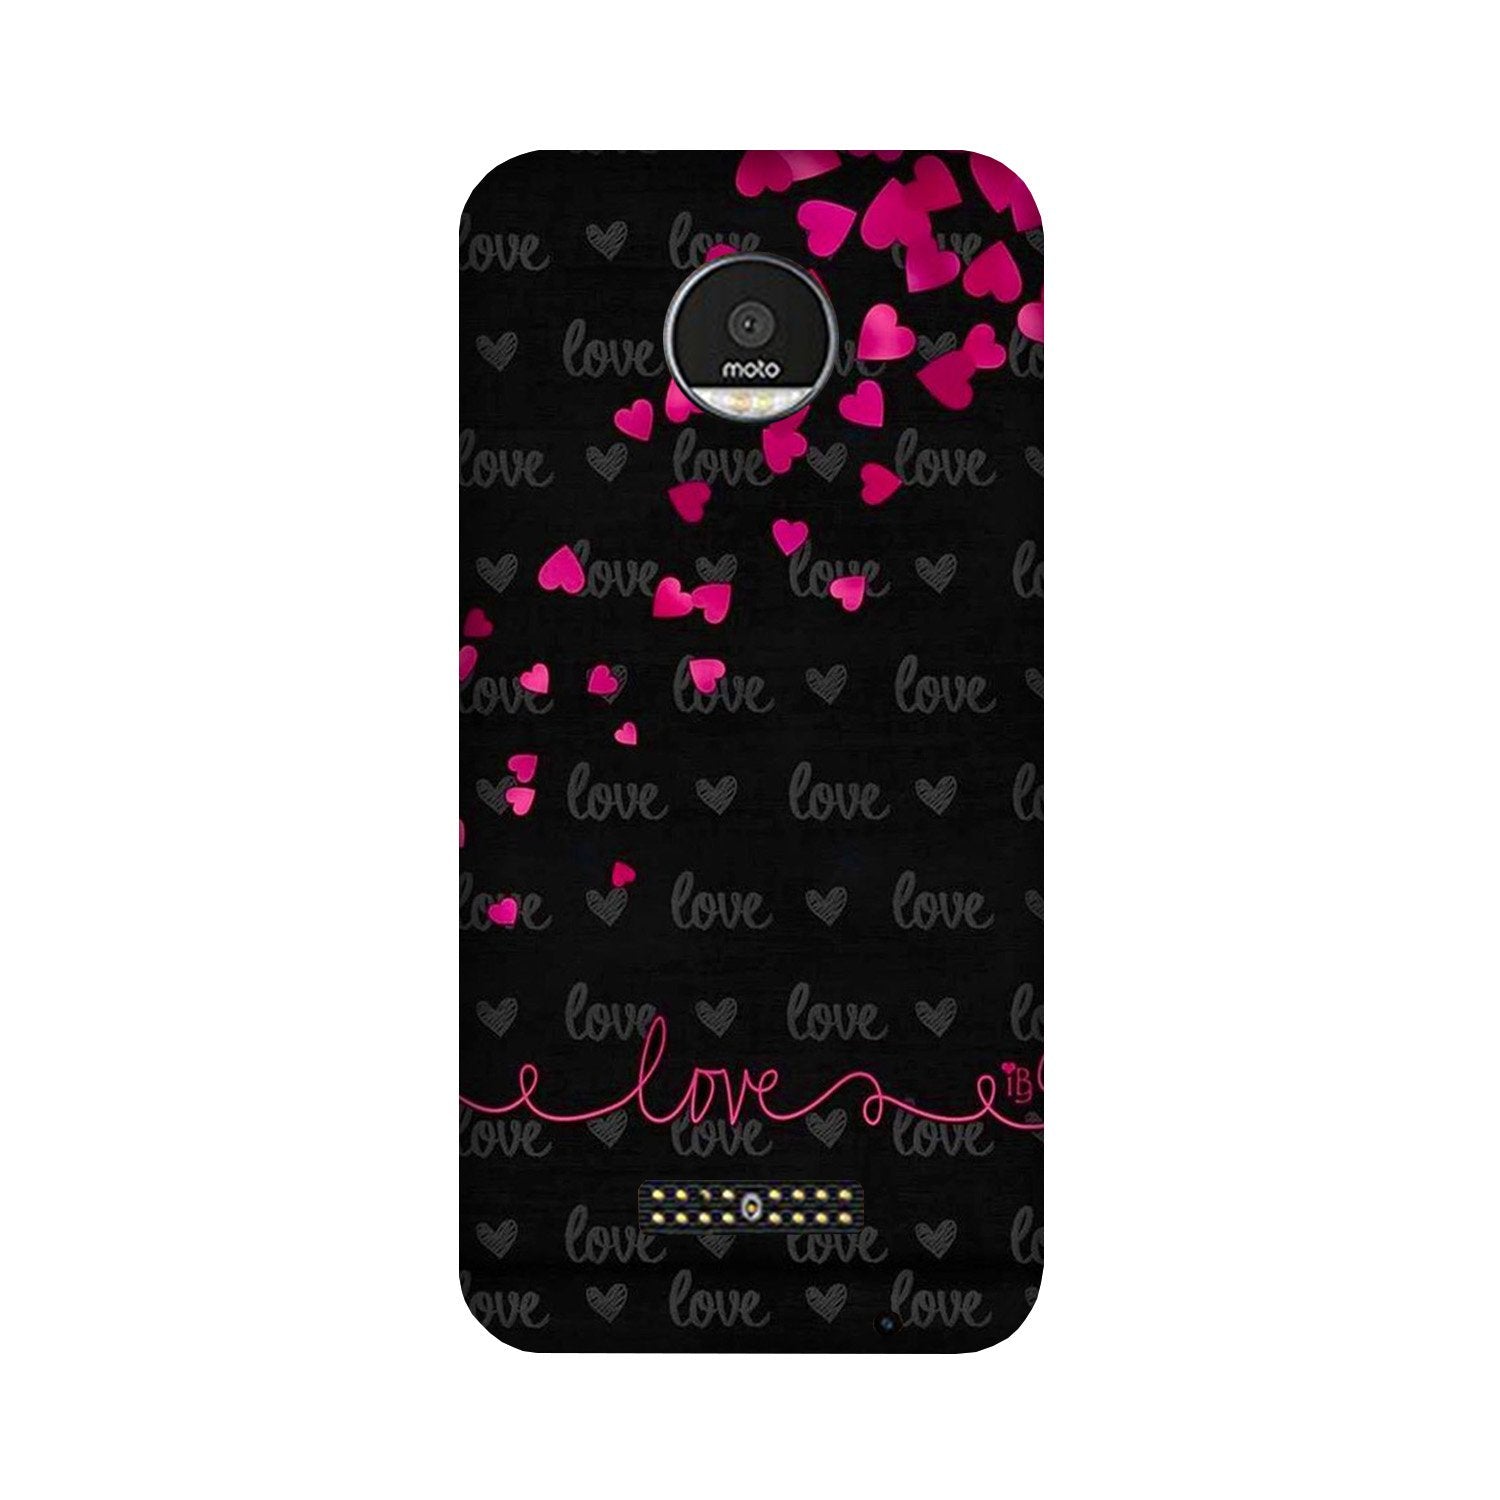 Love in Air Case for Moto Z Play